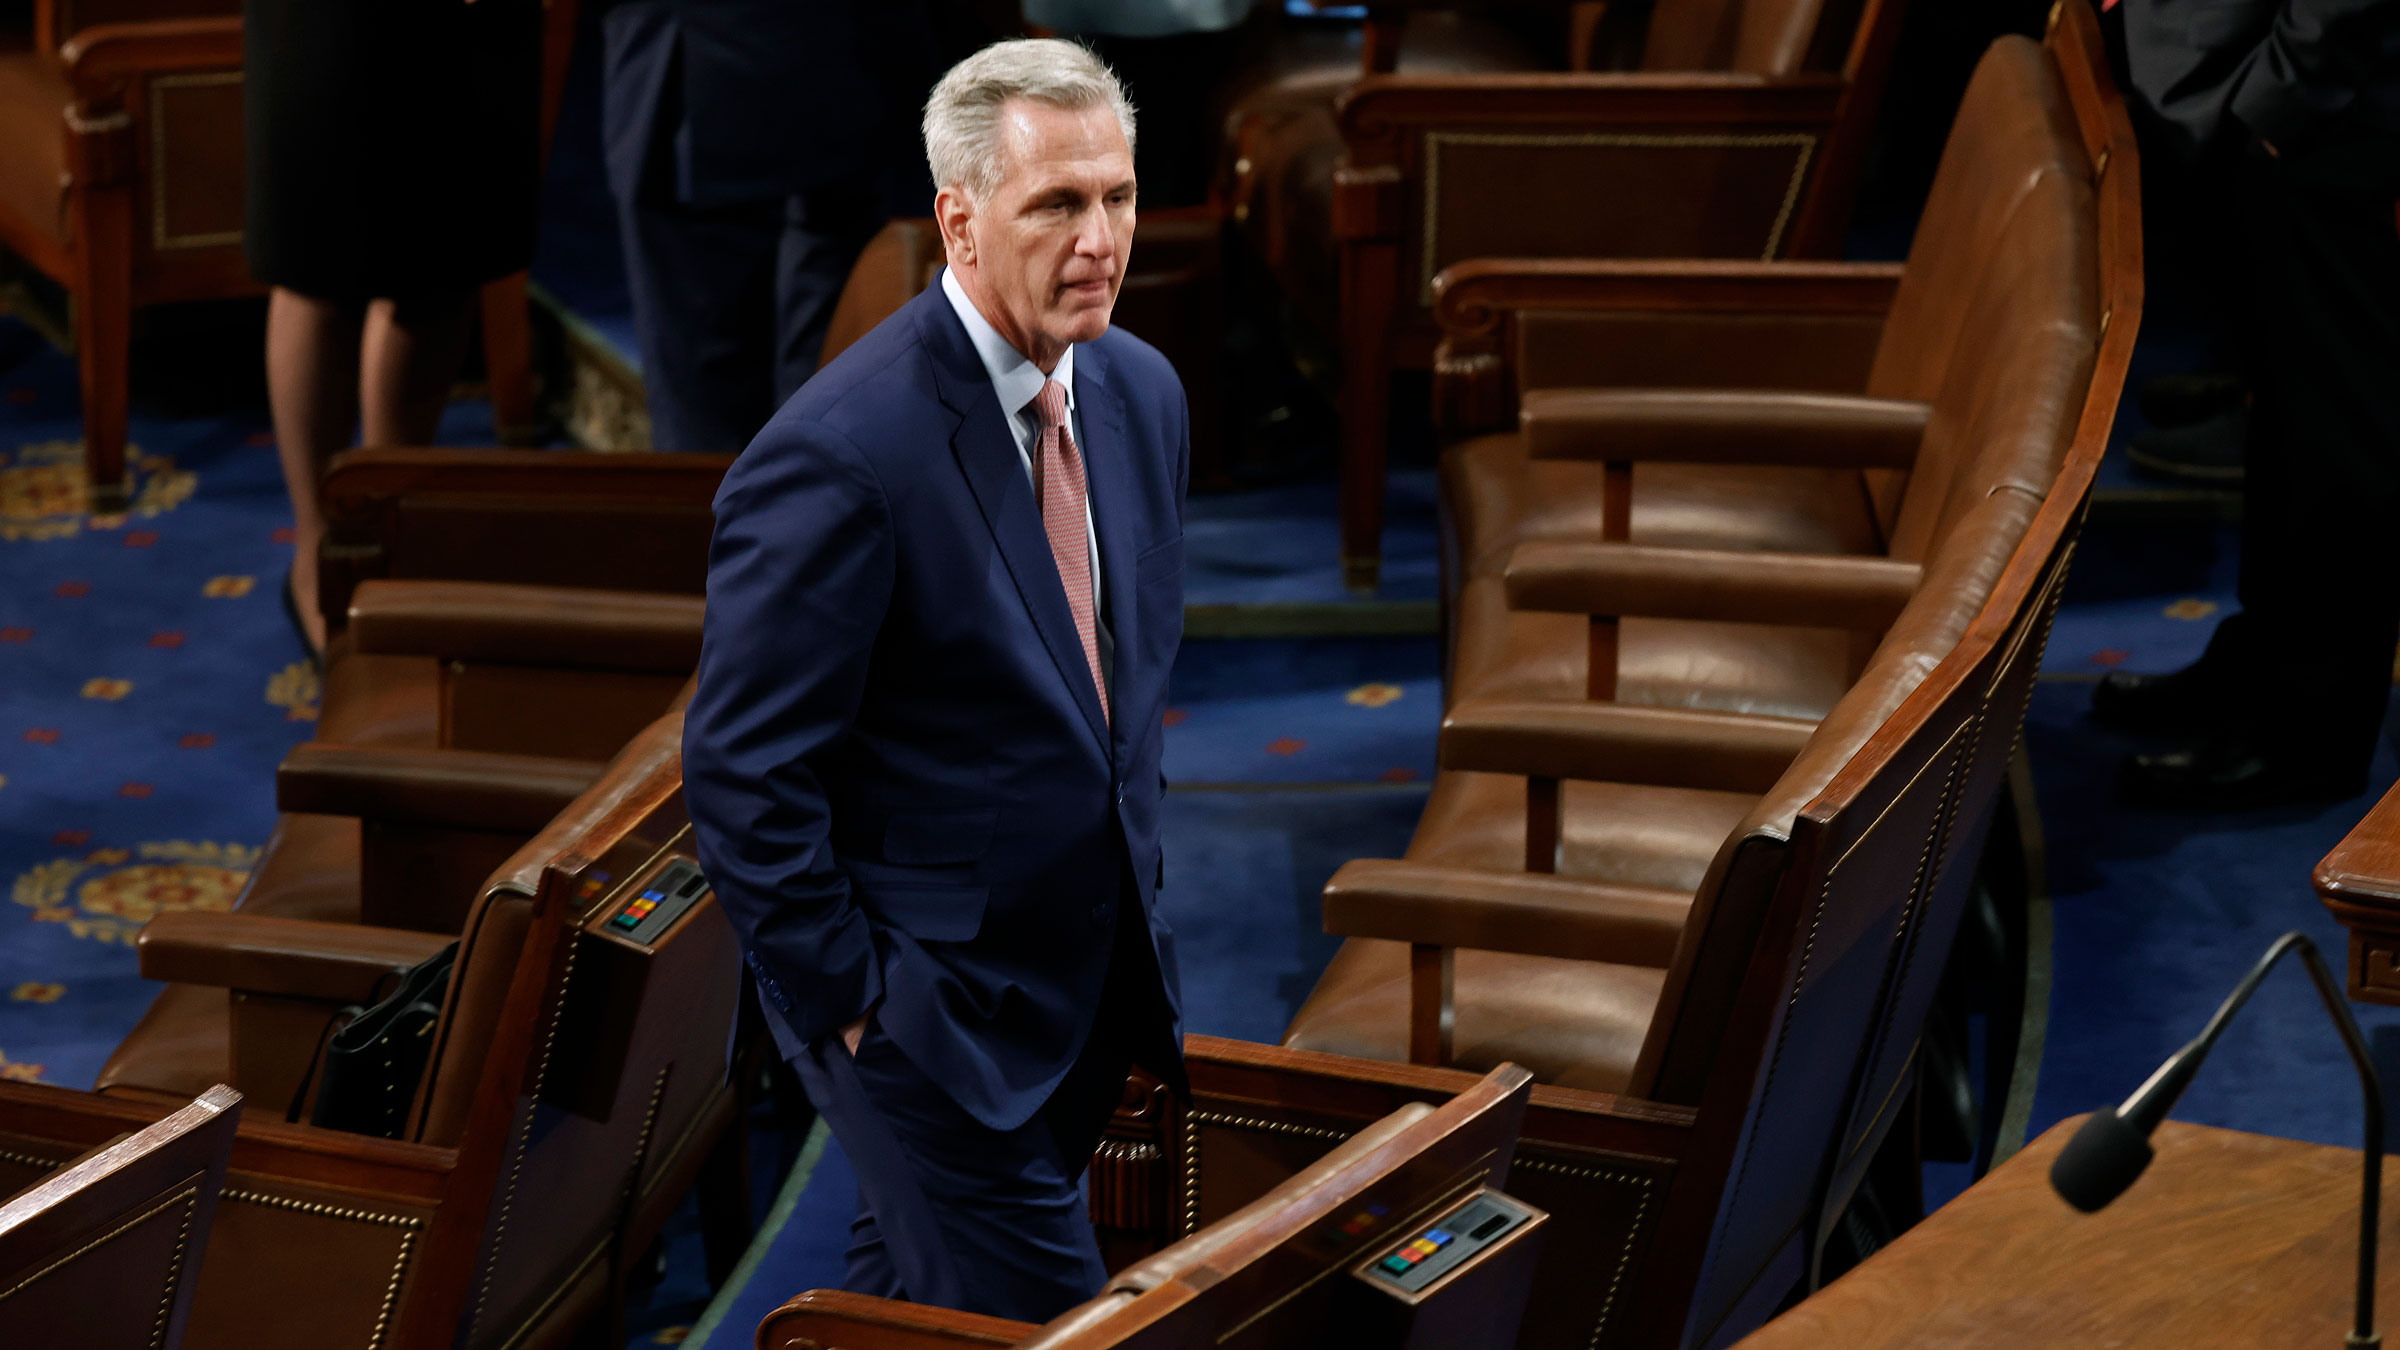 Kevin McCarthy moves through the House chamber between votes on Tuesday.